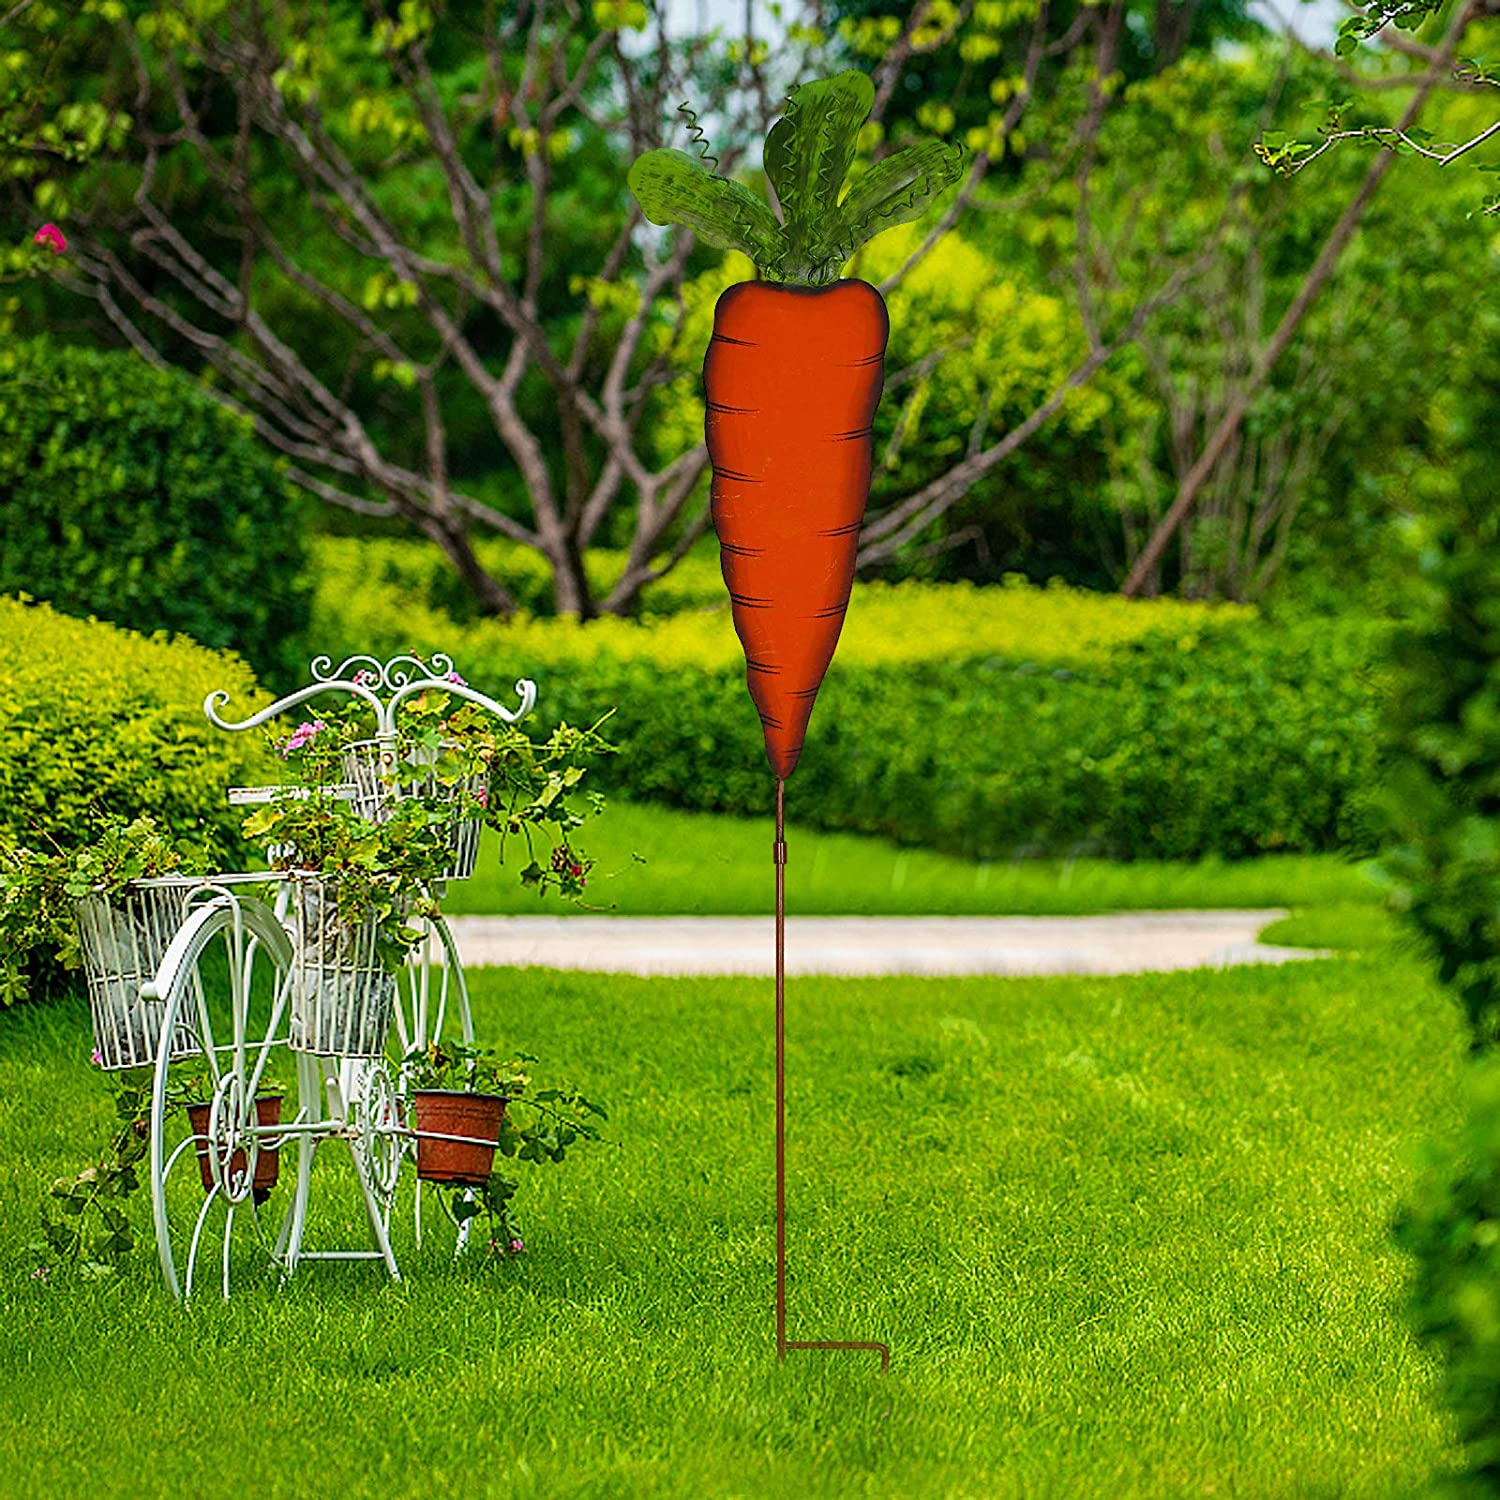 Easter Bunny & Carrot Yard Stake Set of 4, Outdoor Metal Easter Bunny Carrot Garden Stake Statue Décor Easter Yard Sign Decoration Outdoor for Easter Spring Home Garden Decor (Multicolor) - image 5 of 7